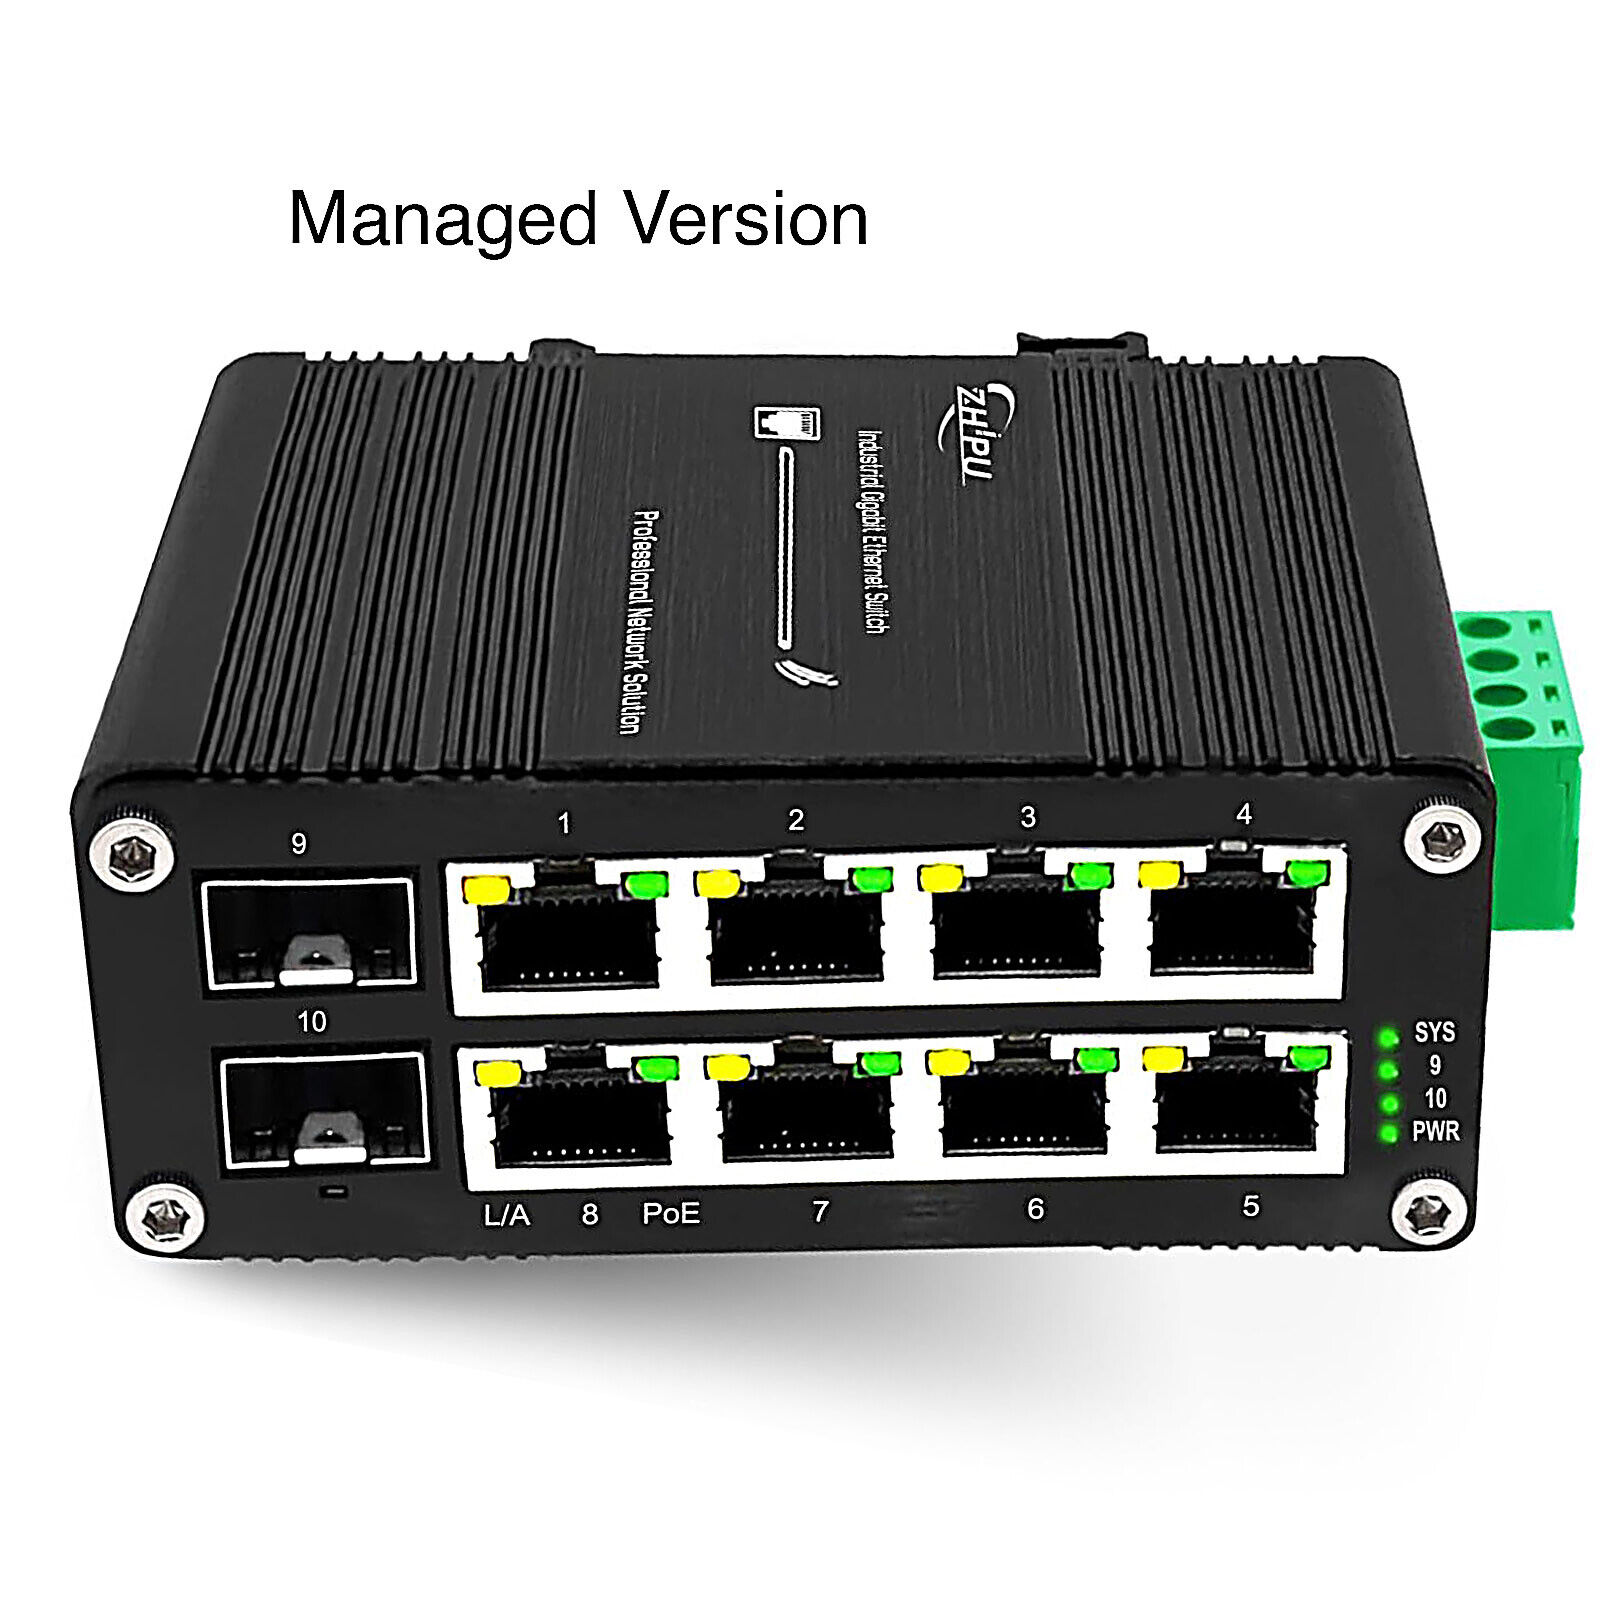 Industrial 8 Port Gigabit Switches - Managed/Unmanaged Versions - Rack Powered